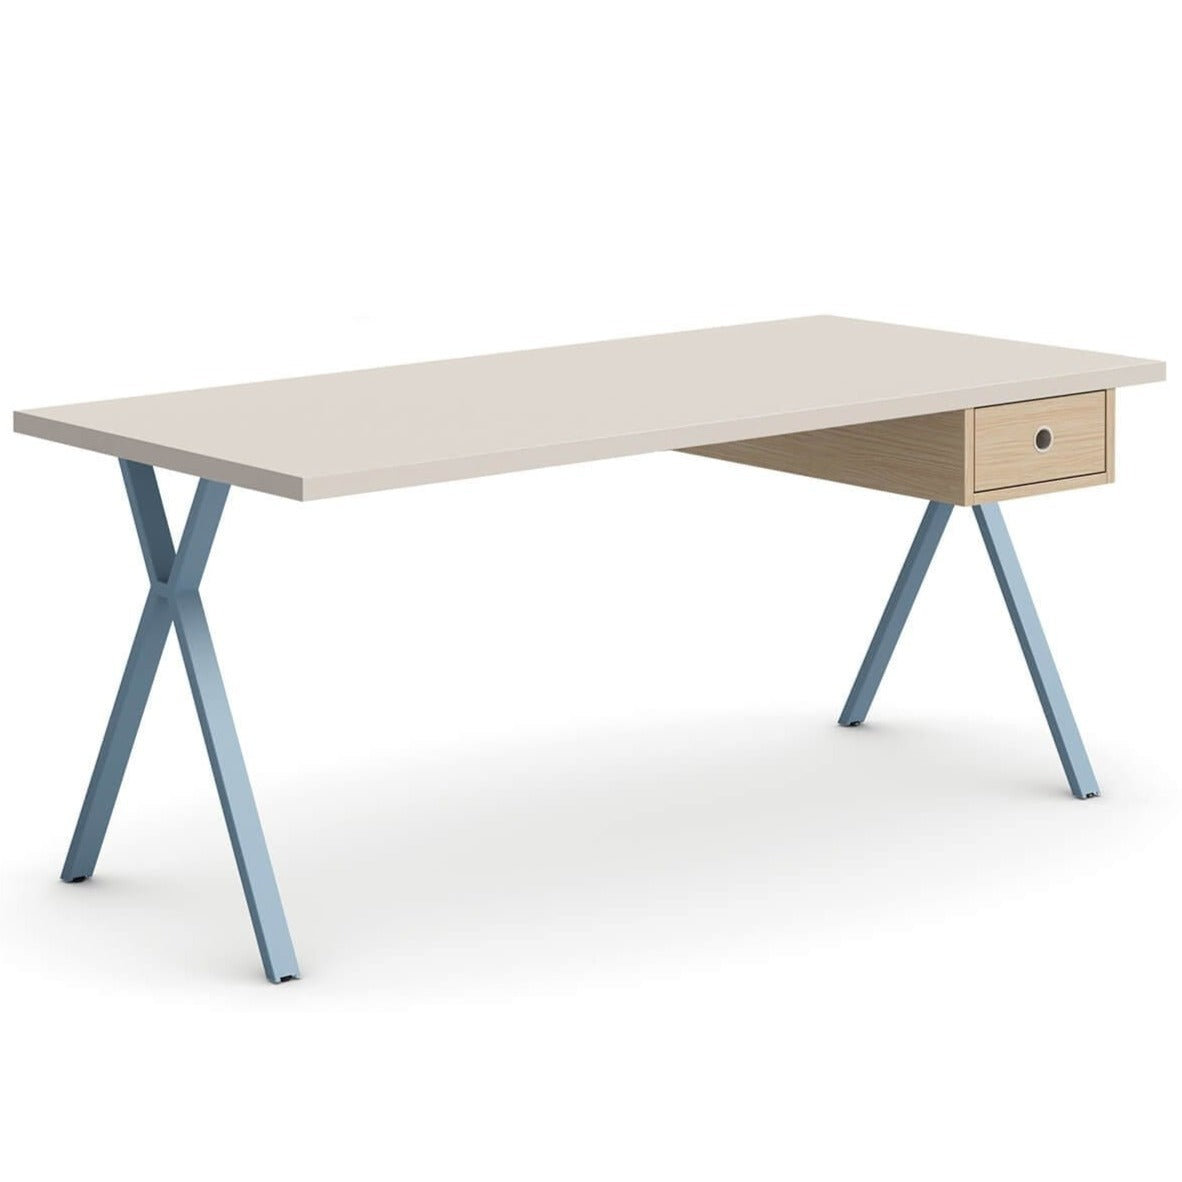 Luce Desk by Nidi Design – Choice of Colours and Sizes